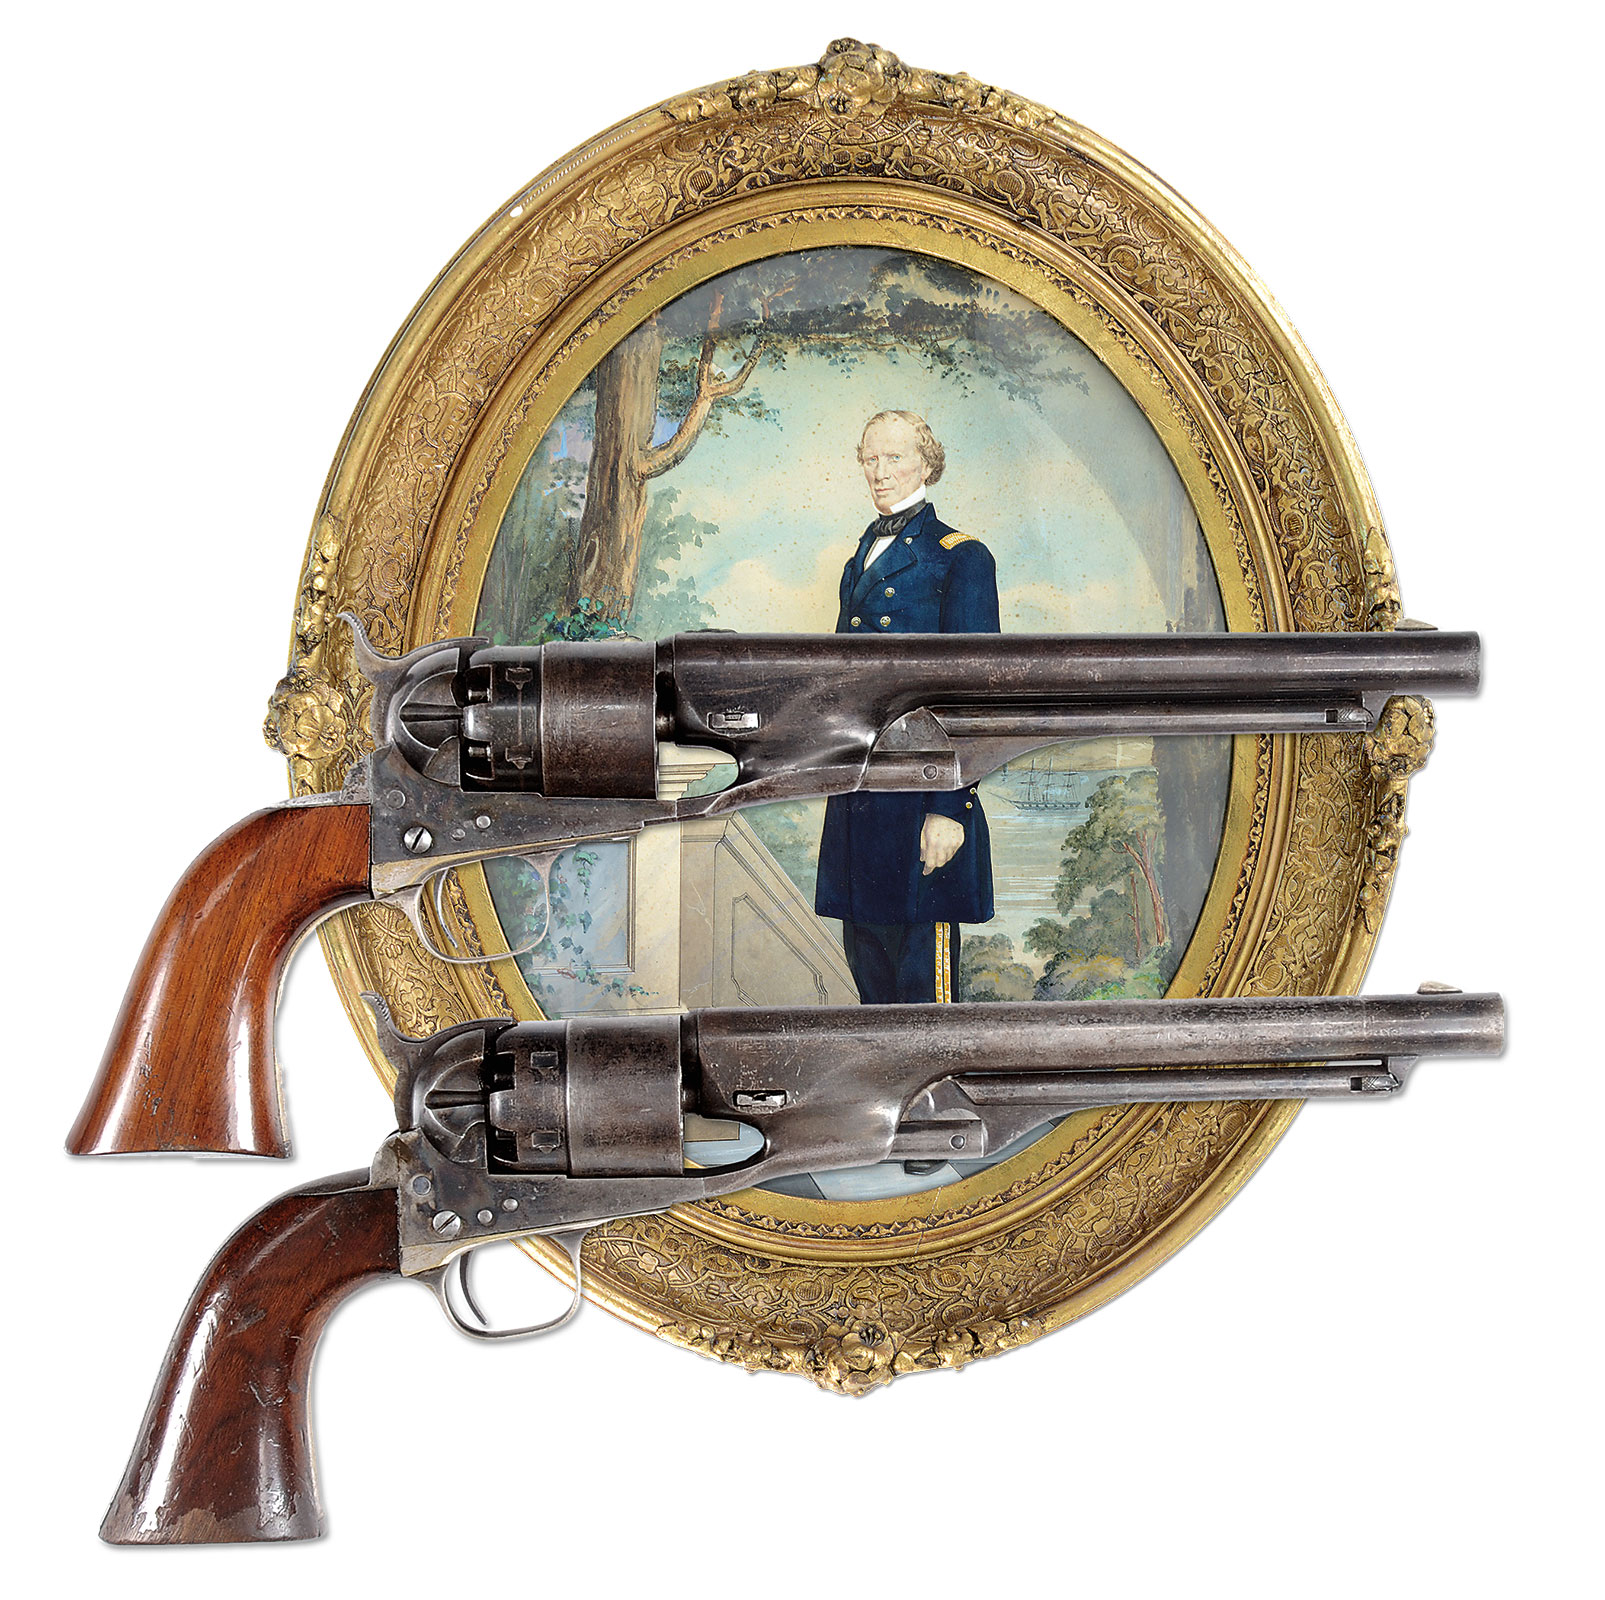 Extremely Fine Cased Pair of Col. Colt Presentation Model 1860 Army Percussion Revolvers to Col. James Cameron who died heroically at the Battle of First Bull Run.